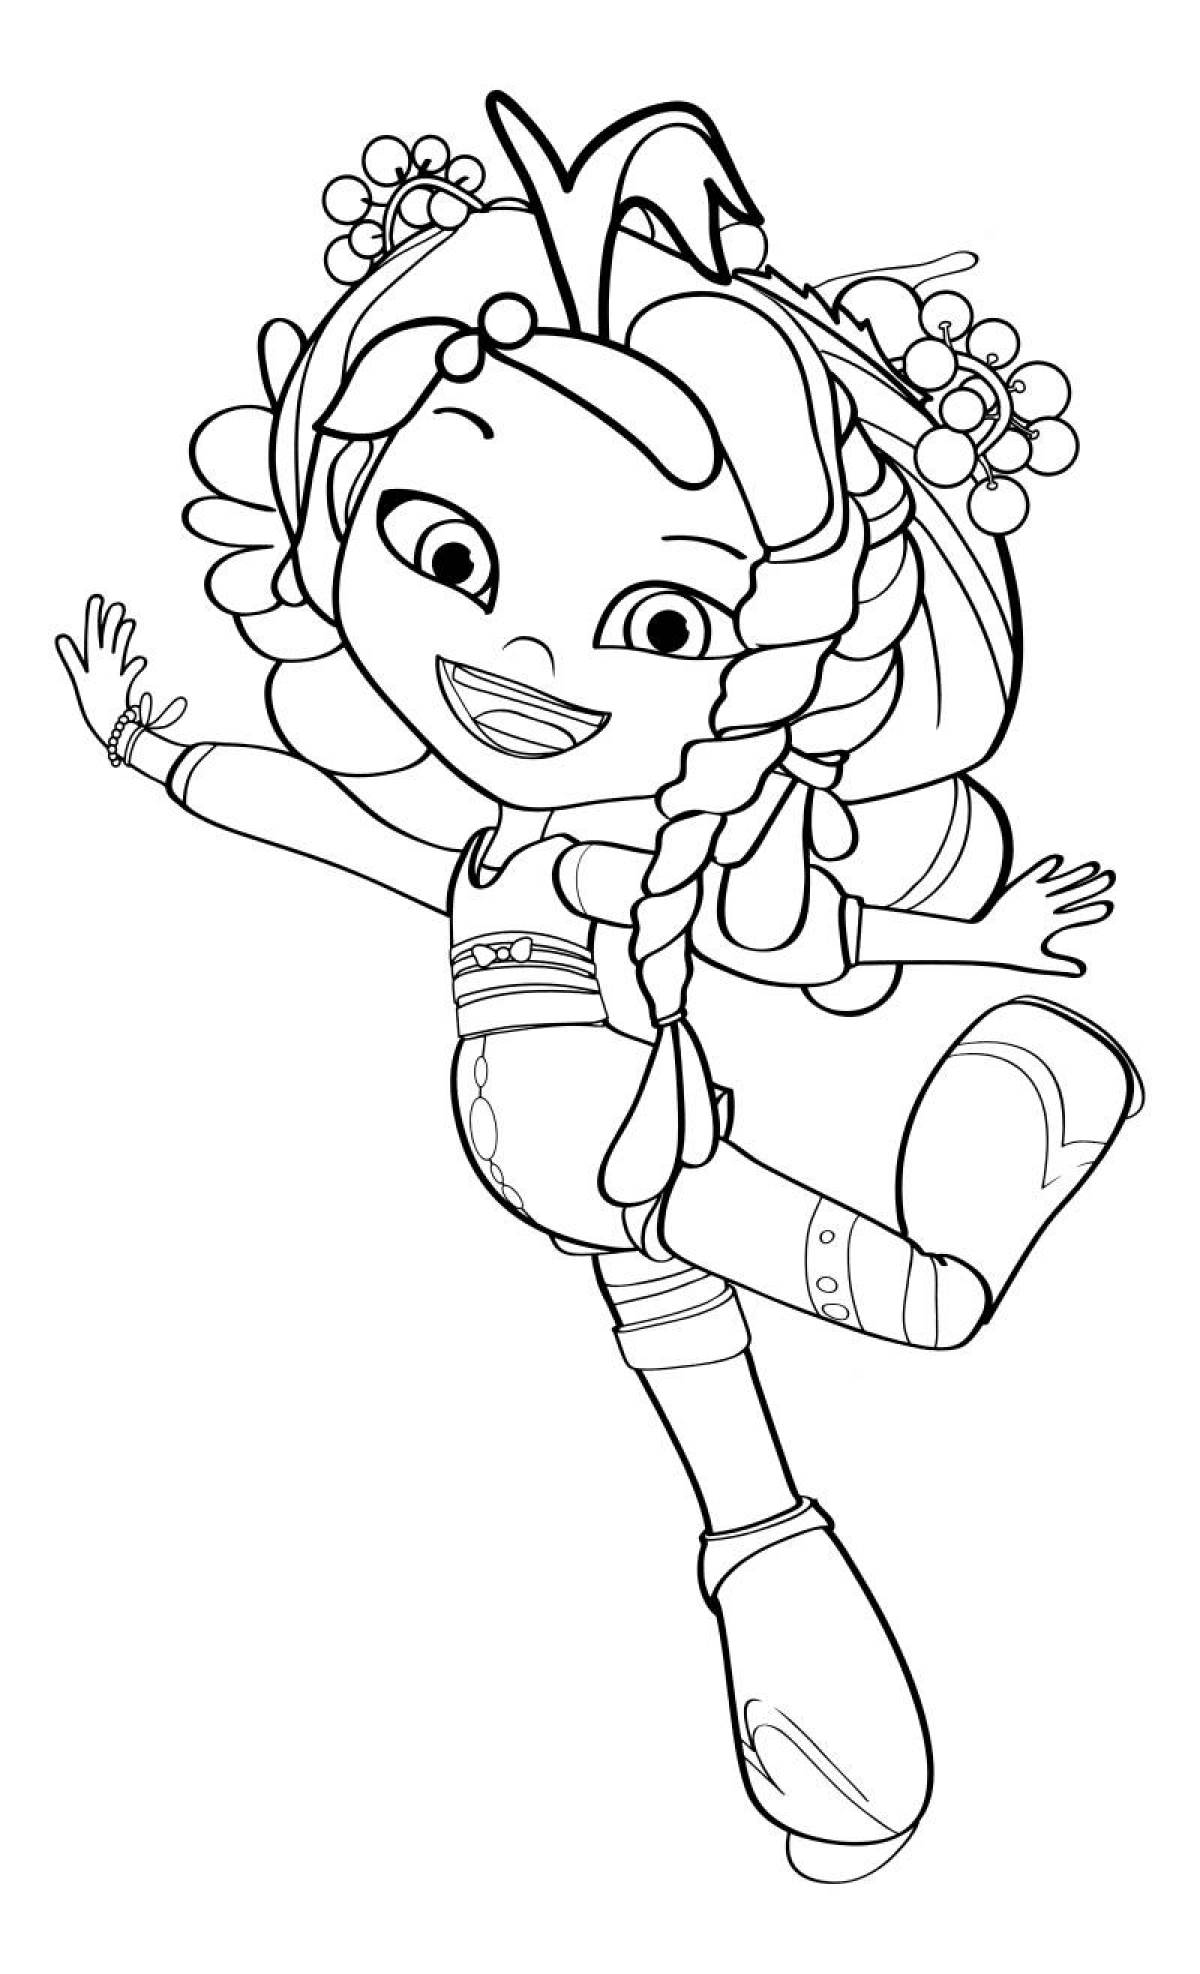 Playful patrol coloring page